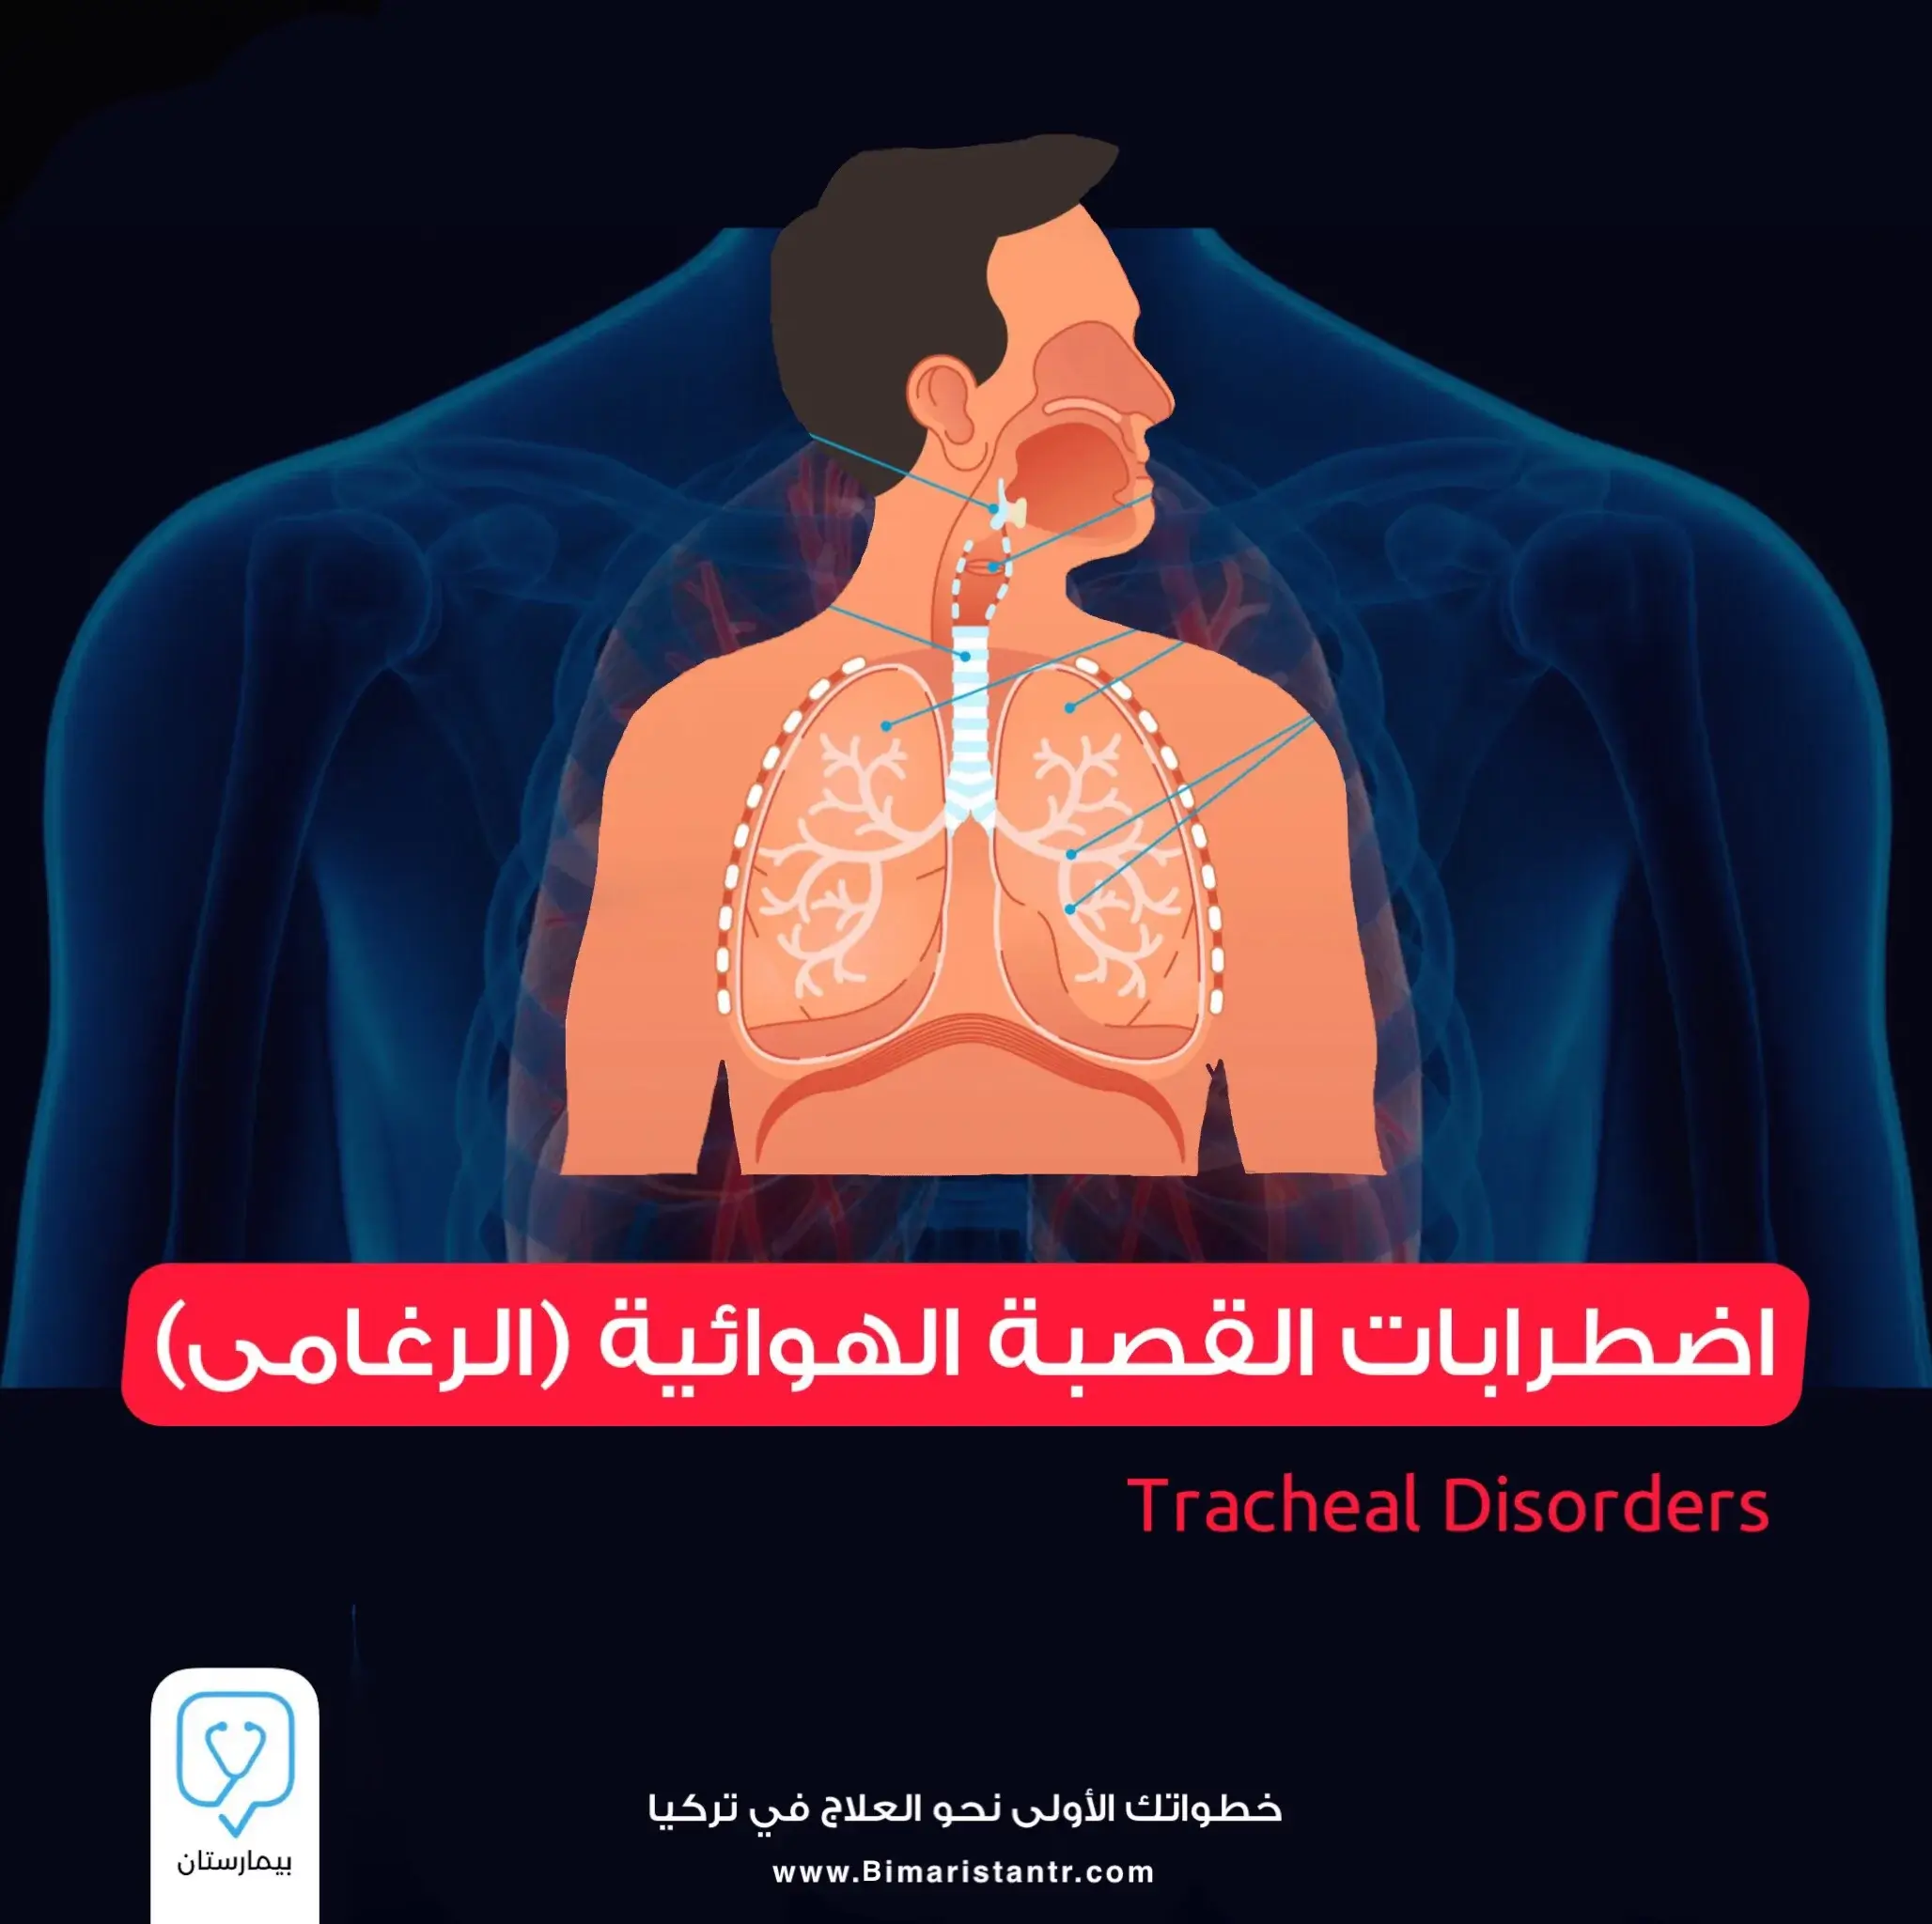 Treatment of tracheal (tracheal) disorders in Turkey